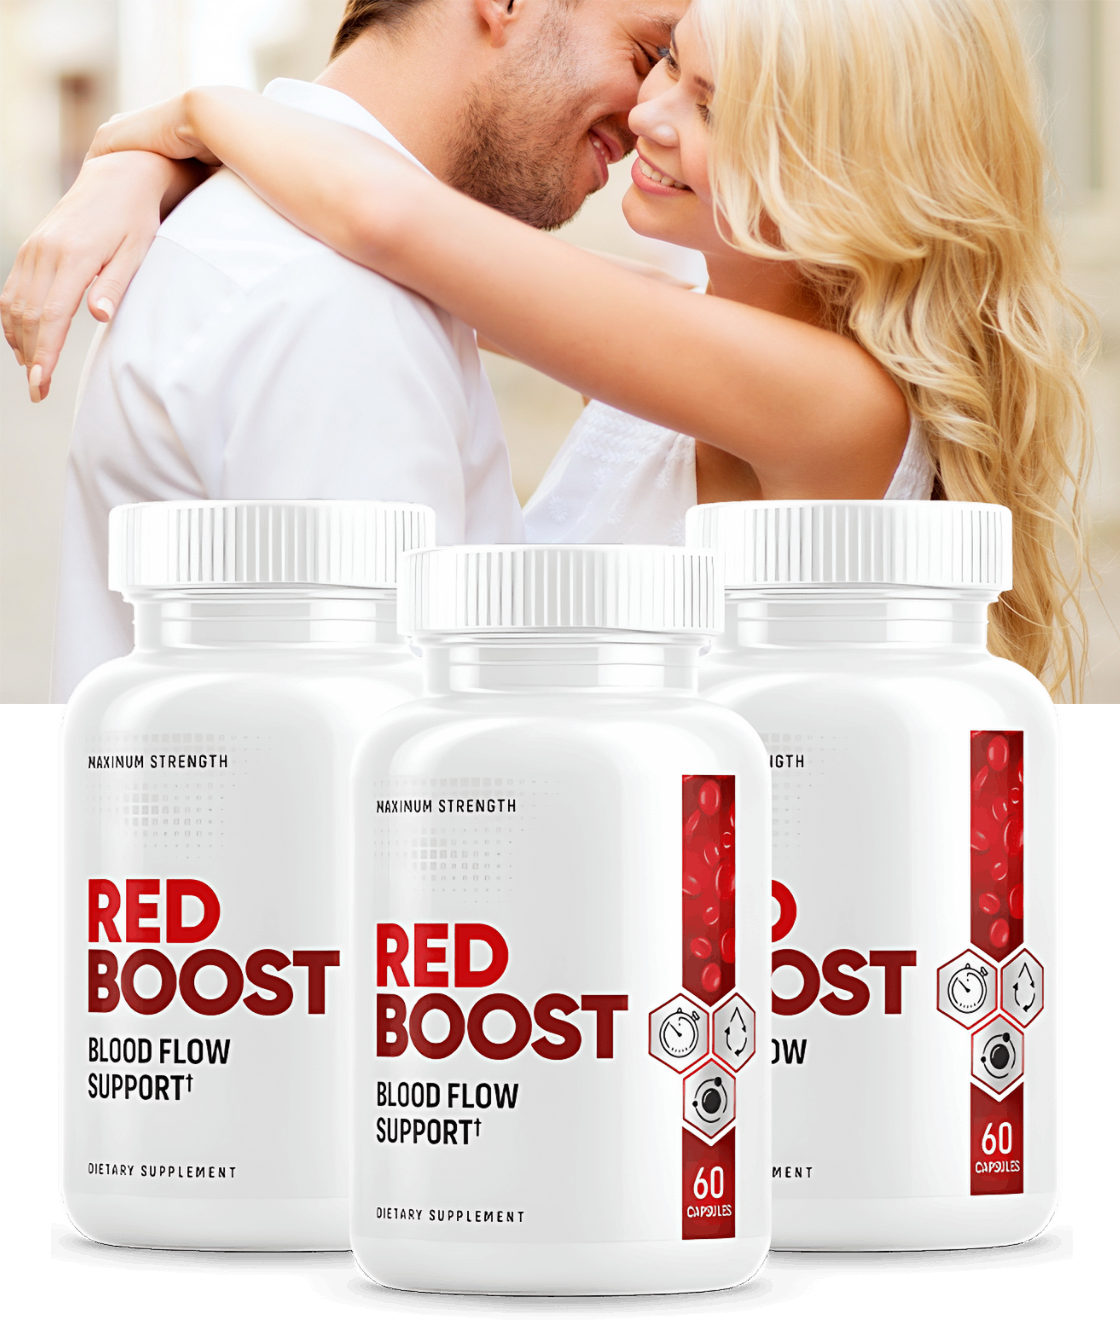 what is red boost?